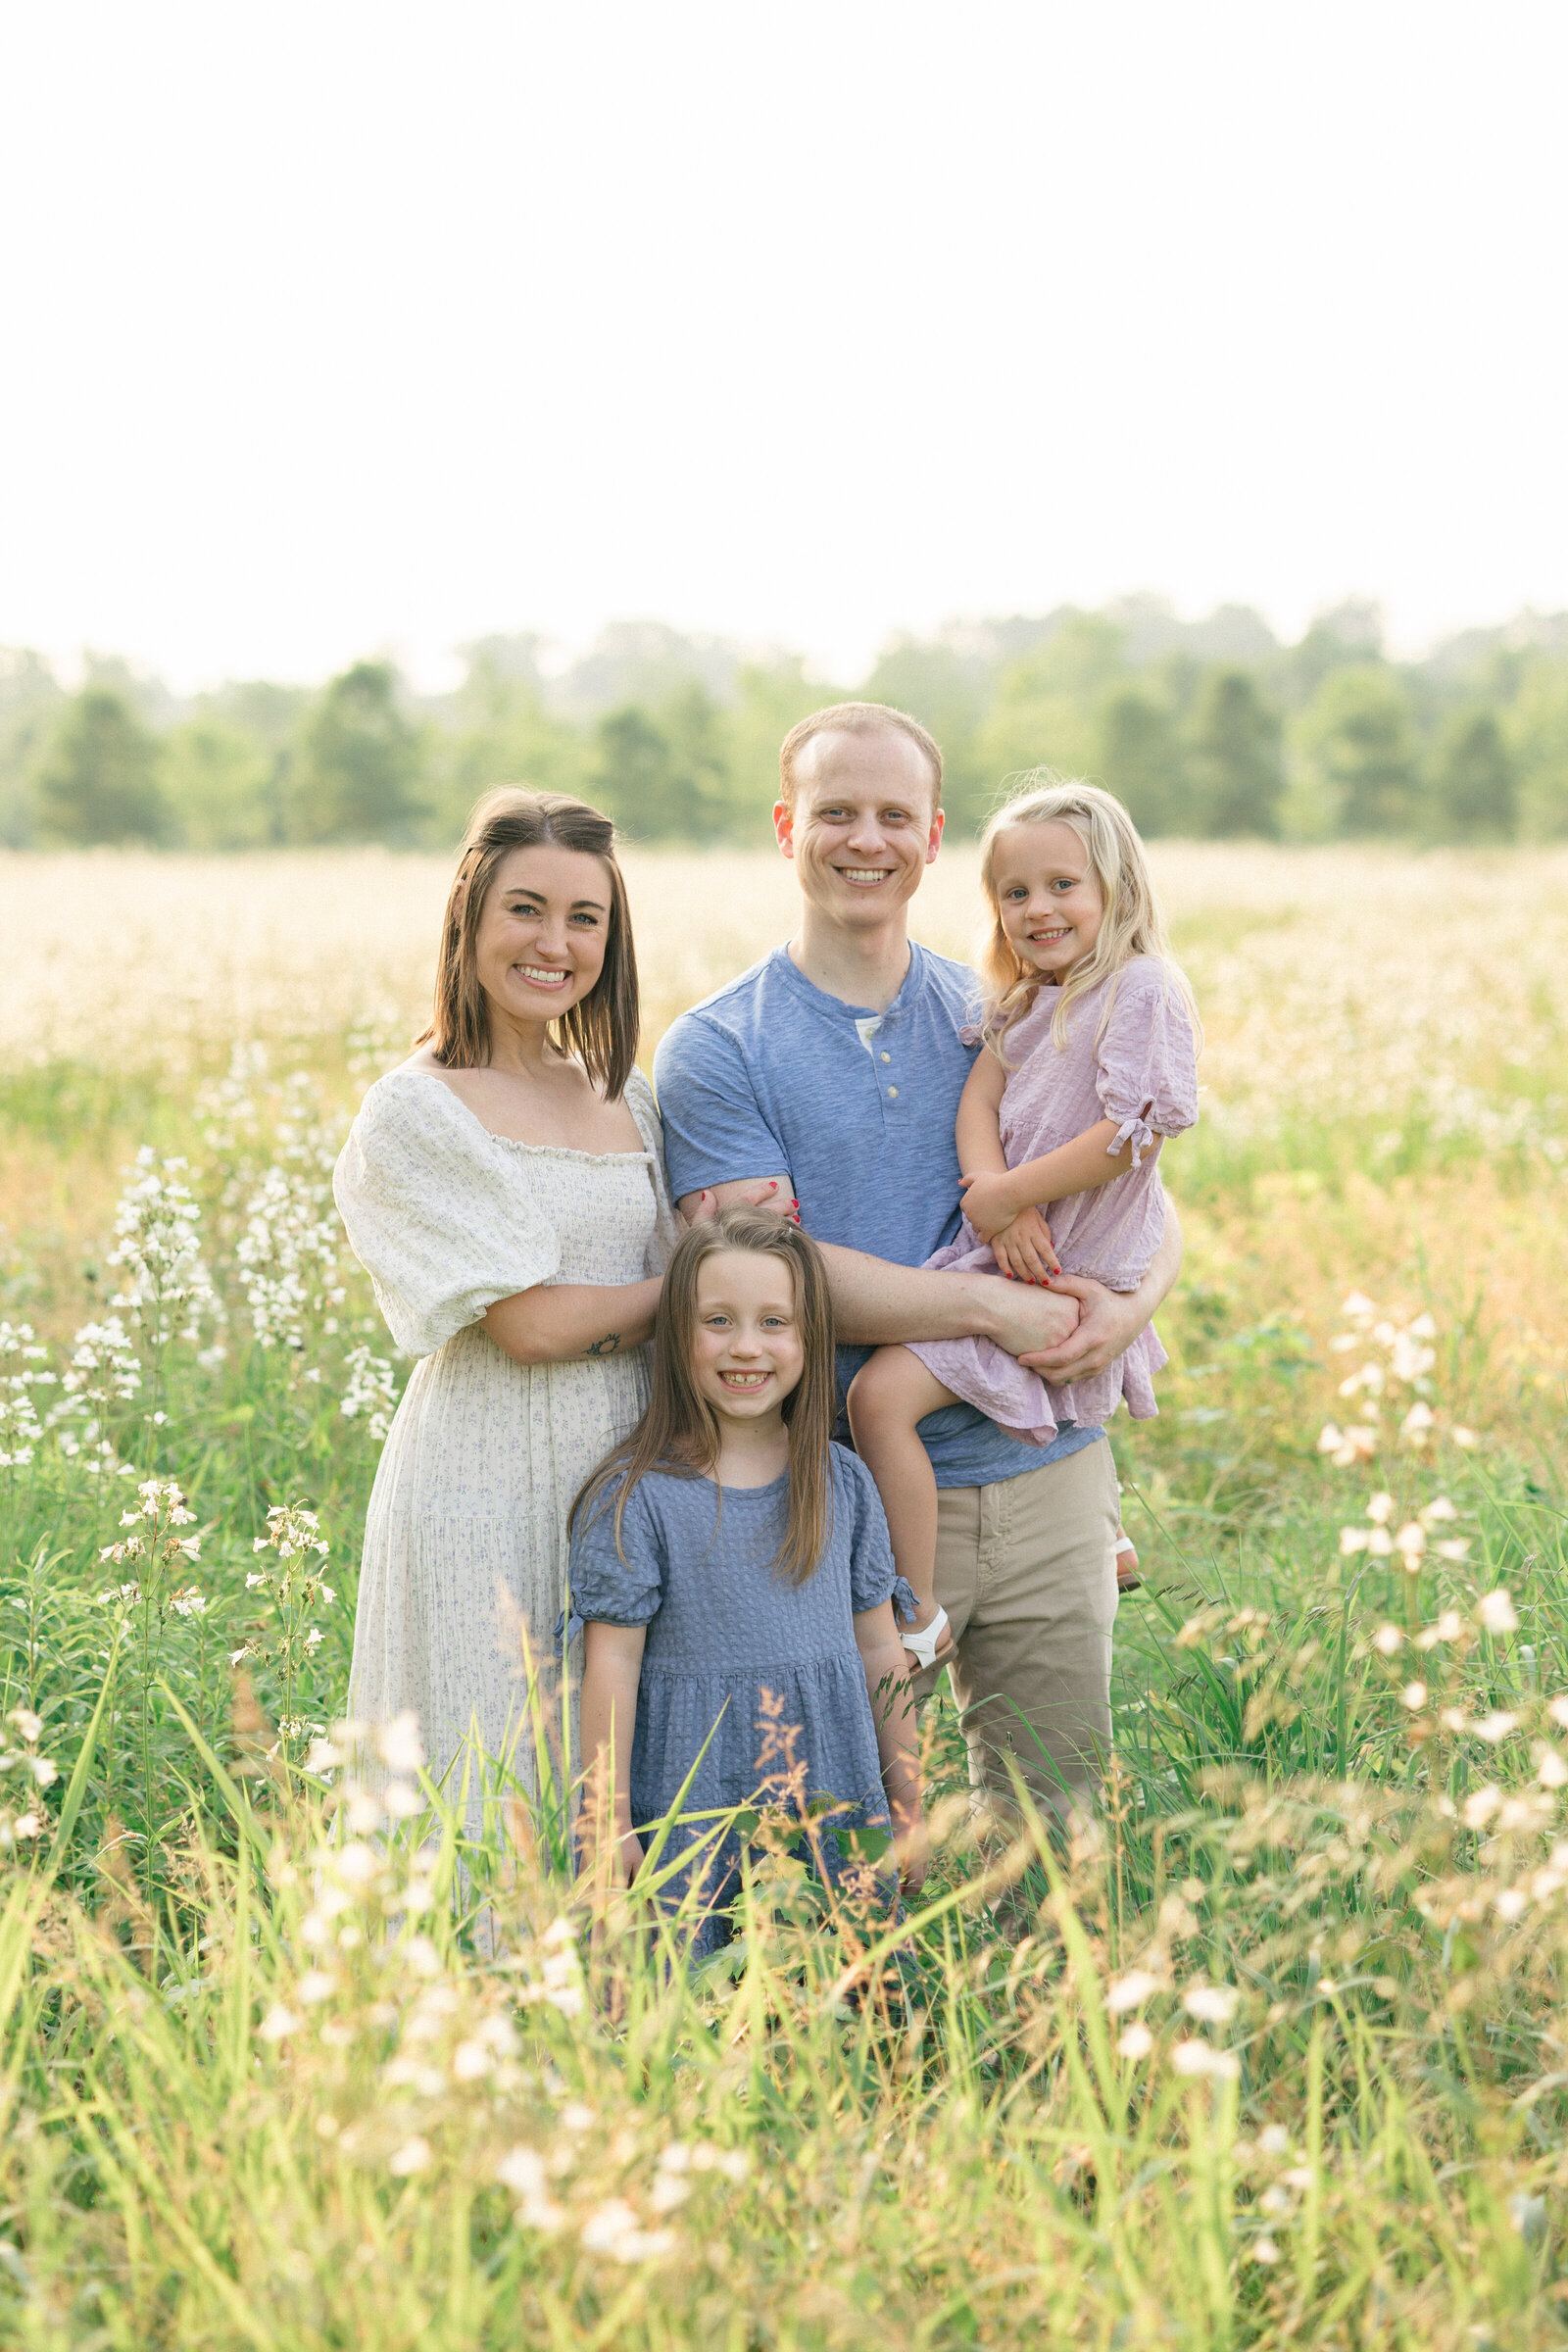 Beautiful family of four smiling in a field of white wildflowers